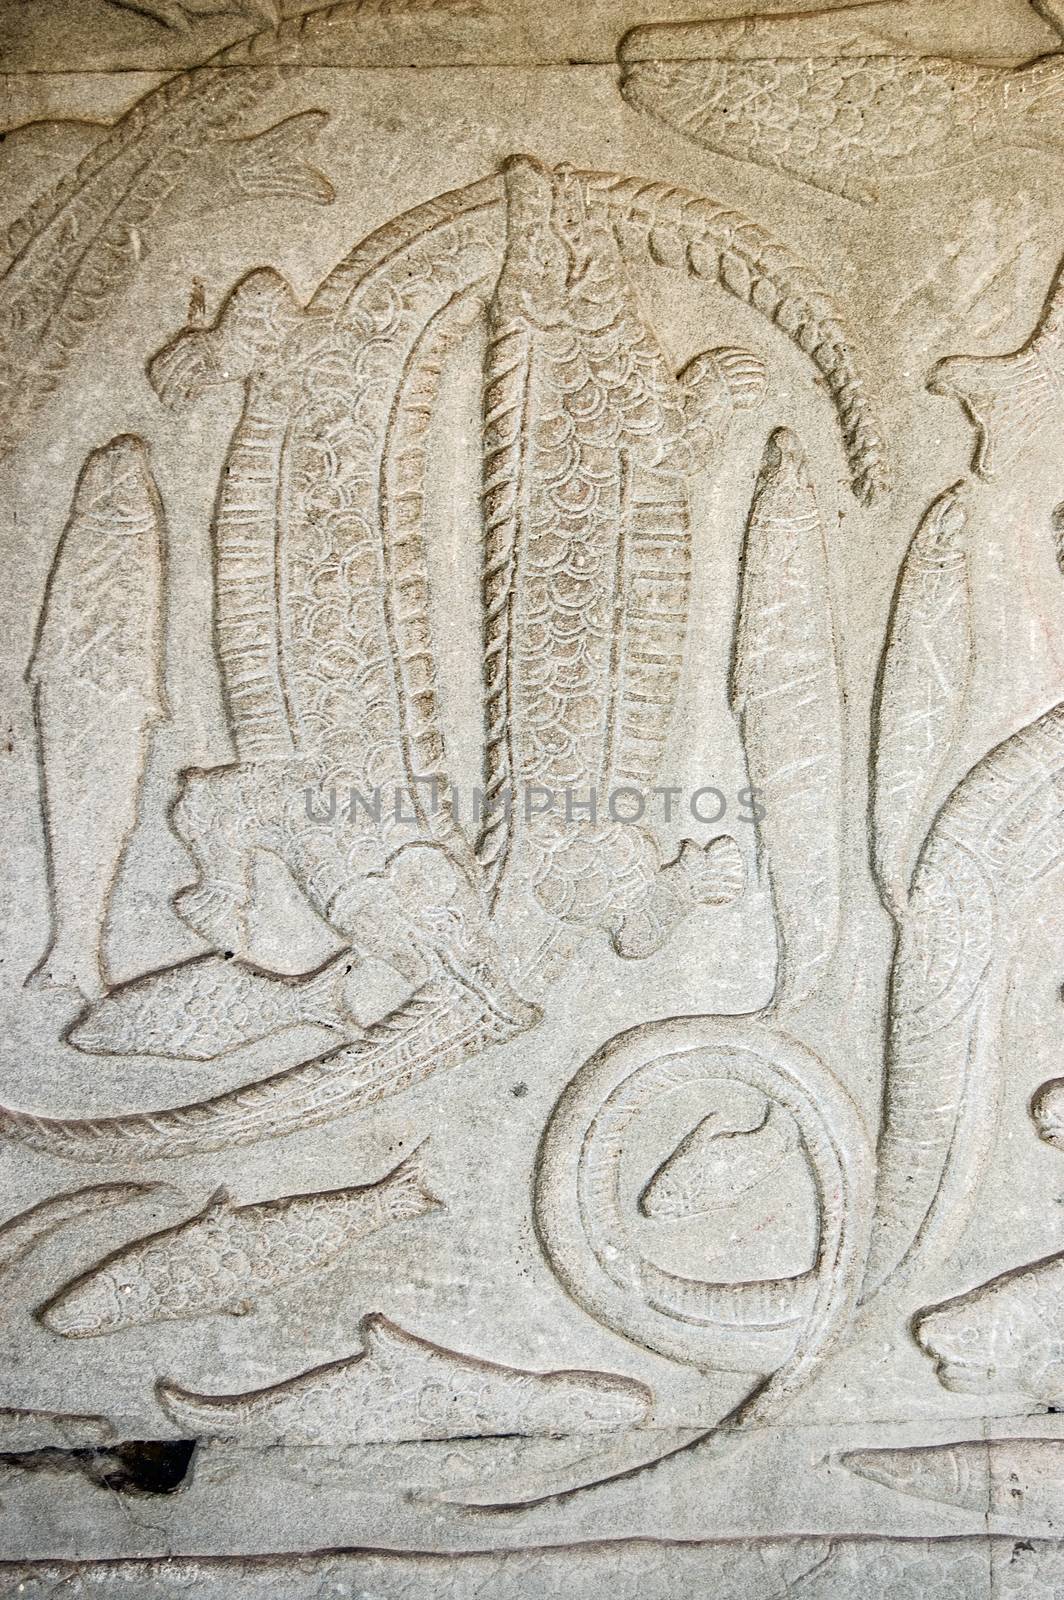 Crocodiles fighting carving, Cambodia by BasPhoto